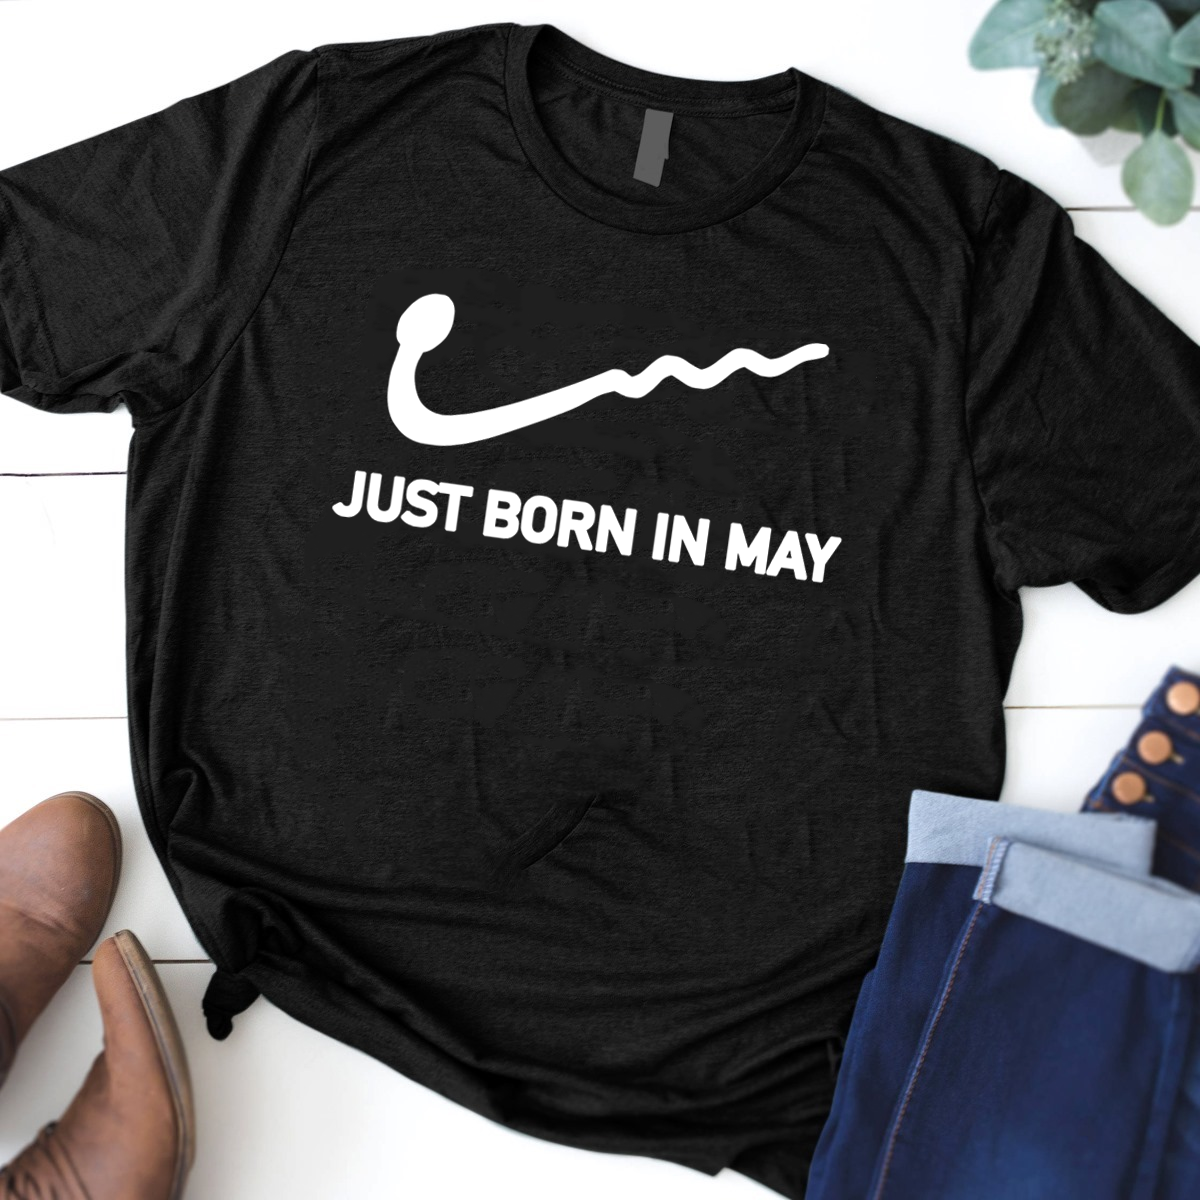 Just born in may - People was born in may